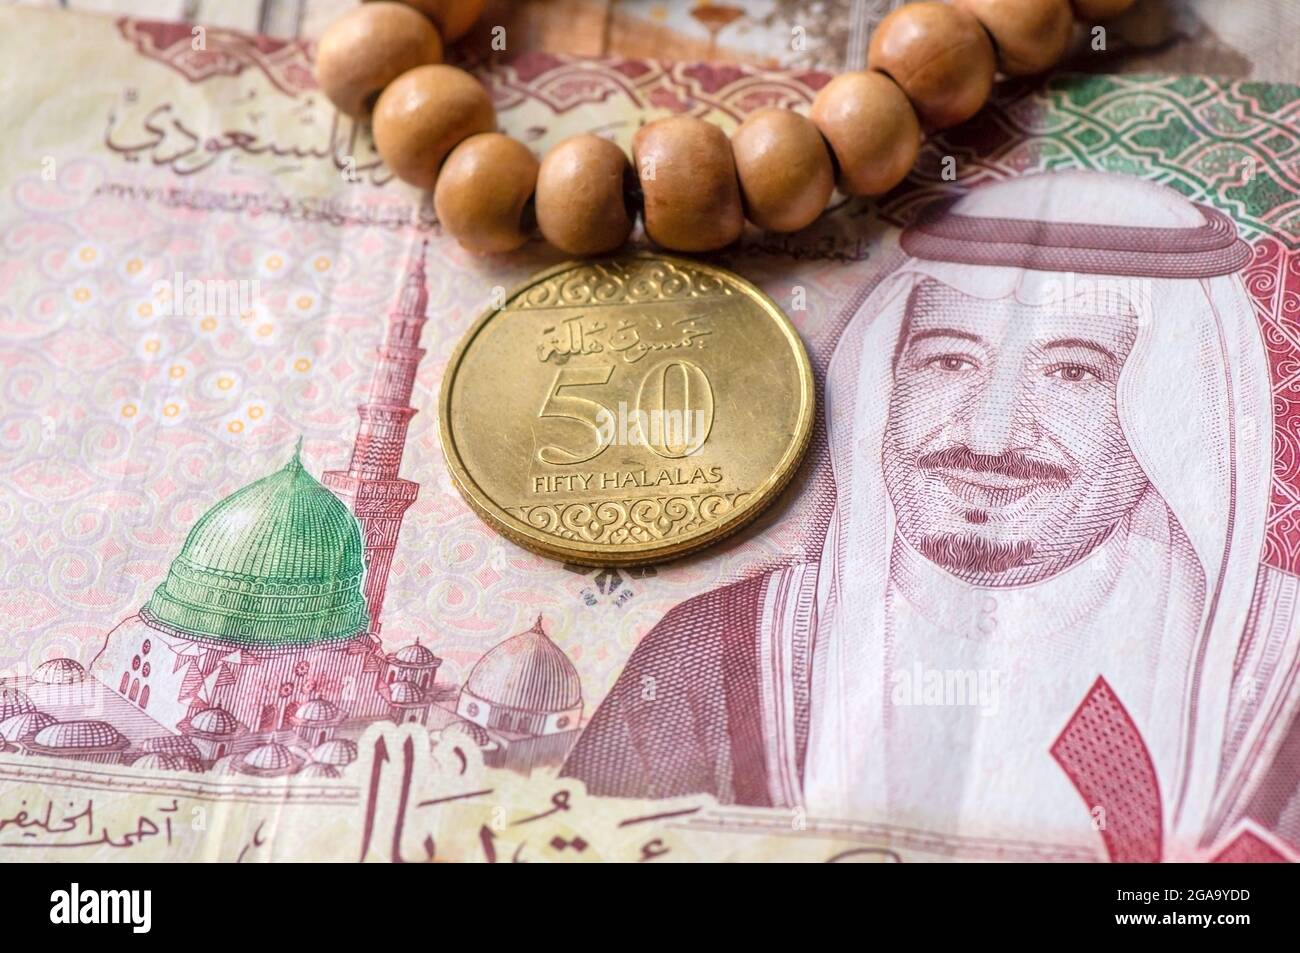 Top view of money, banknote and coin of Saudi Arabia Riyals and prayer beads, in shallow focus Stock Photo